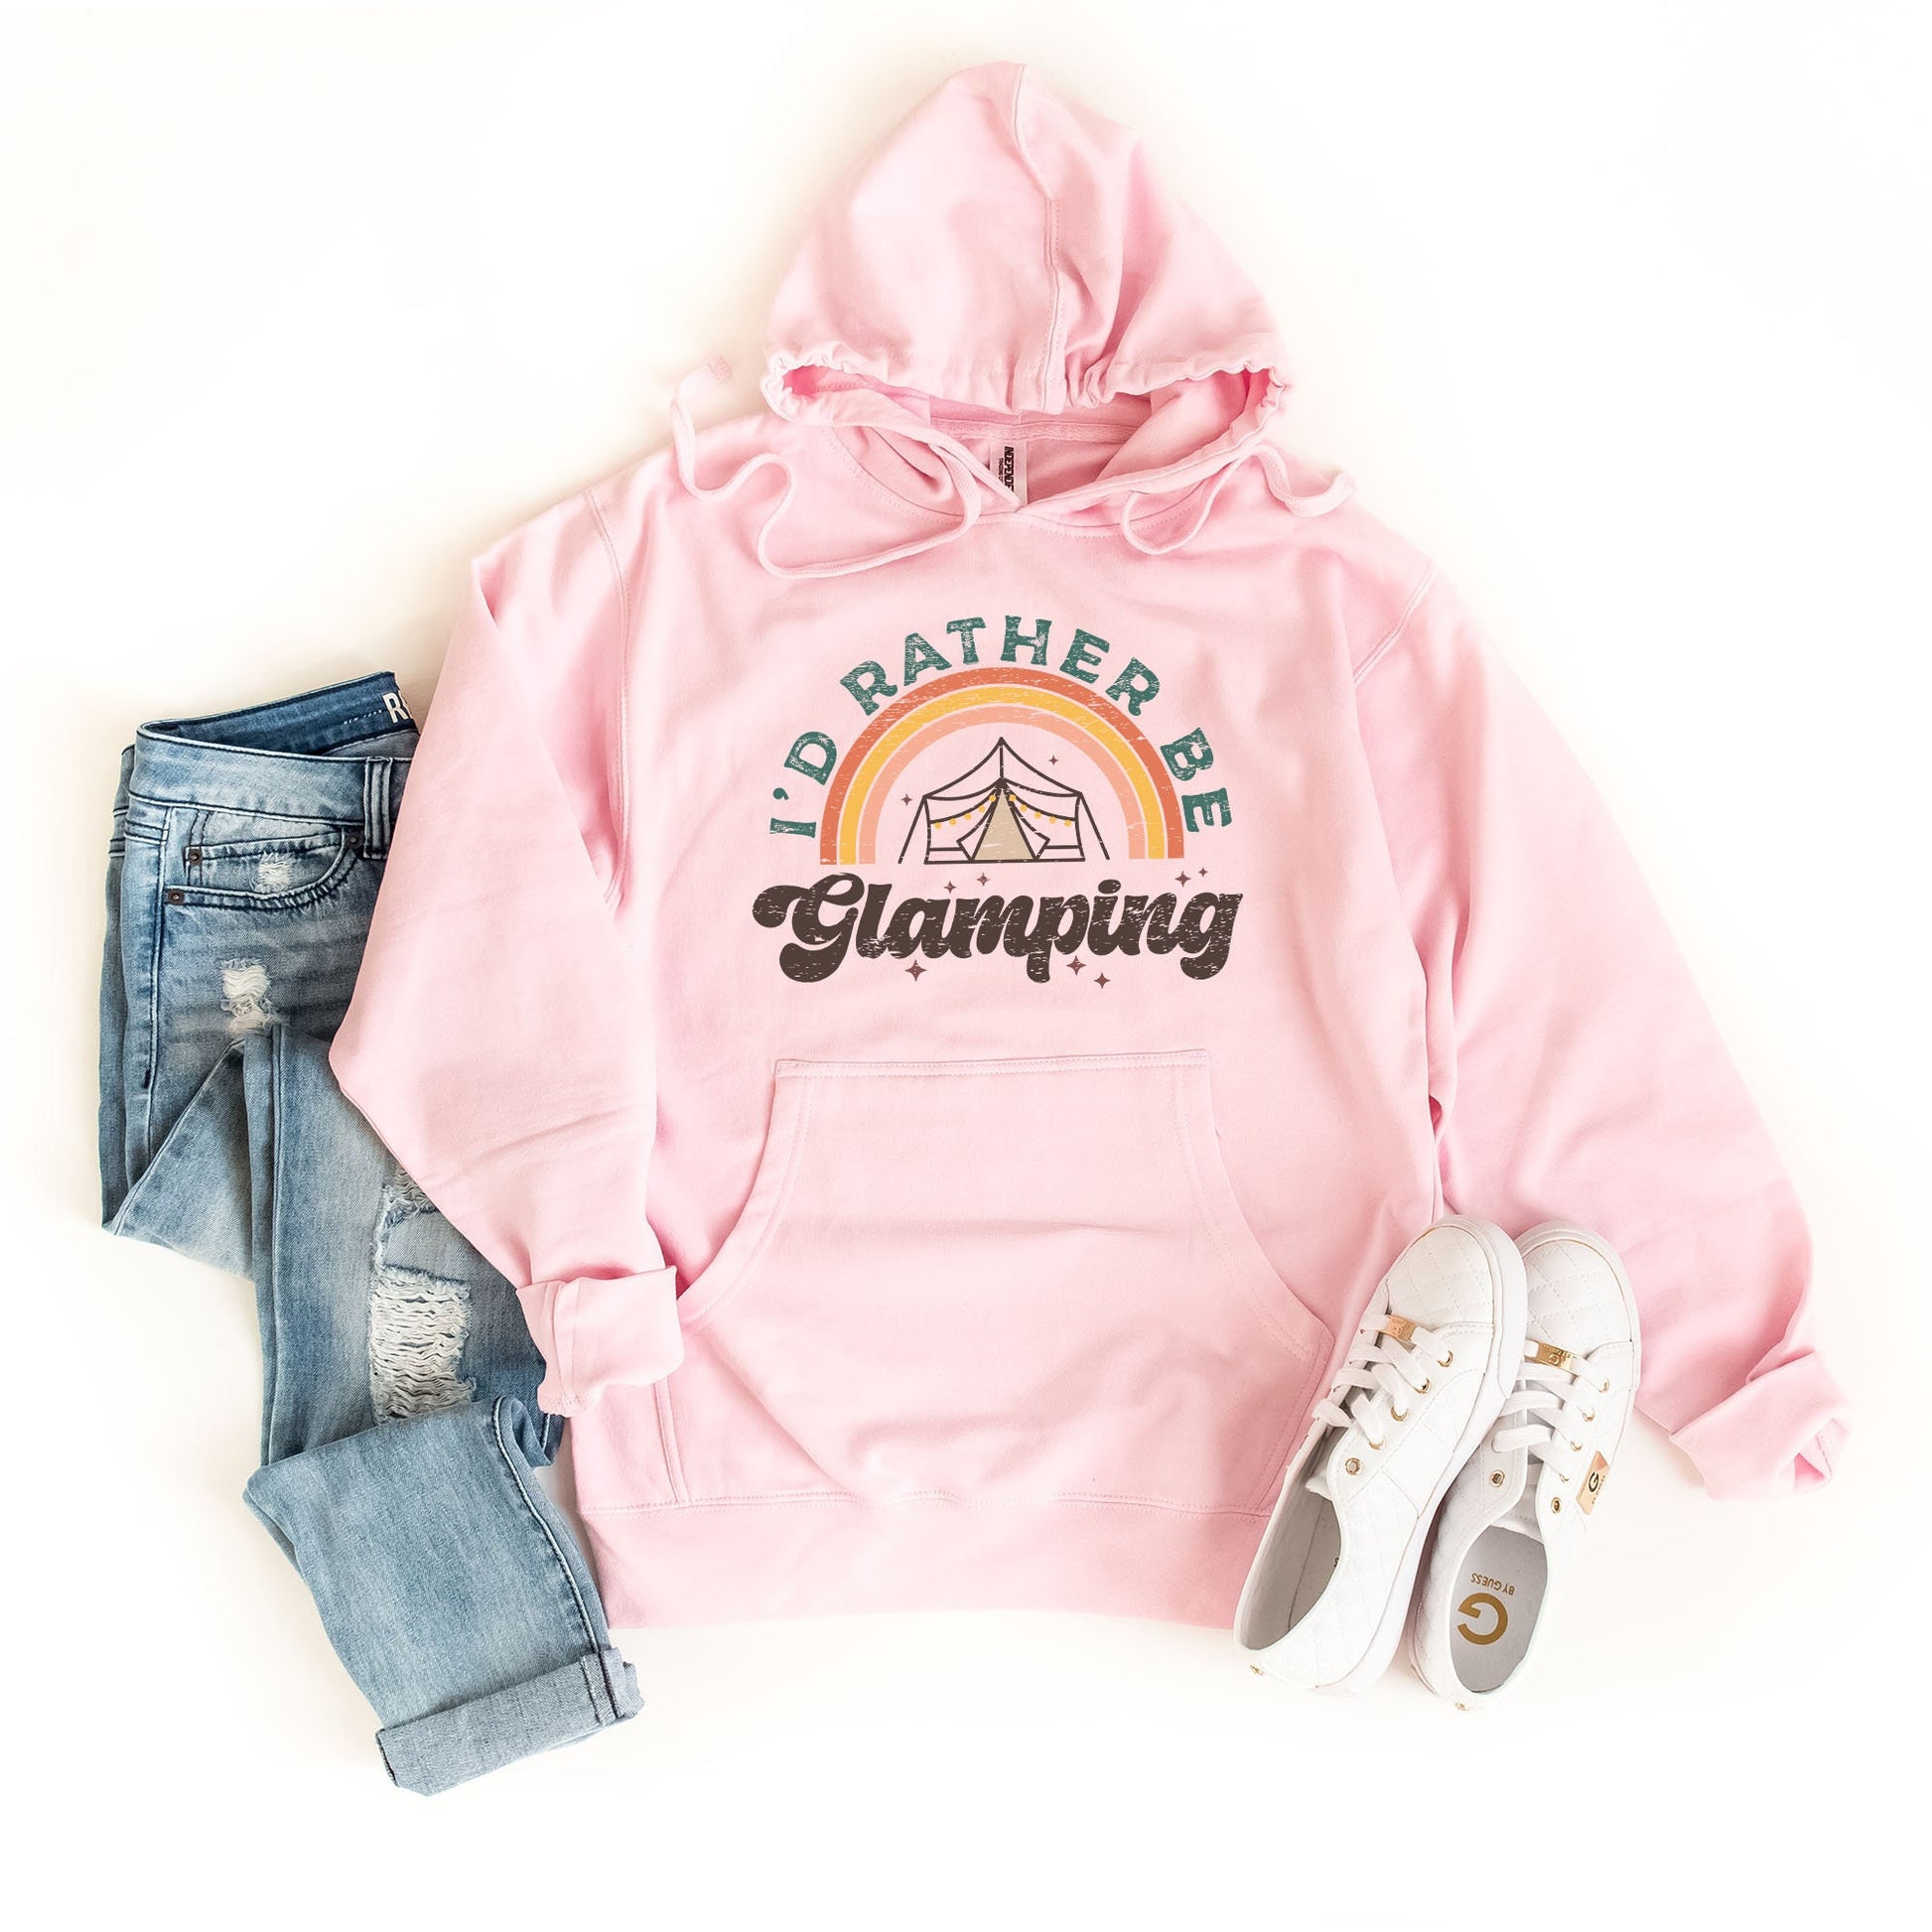 a pink hoodie, jeans, and sneakers on a white background